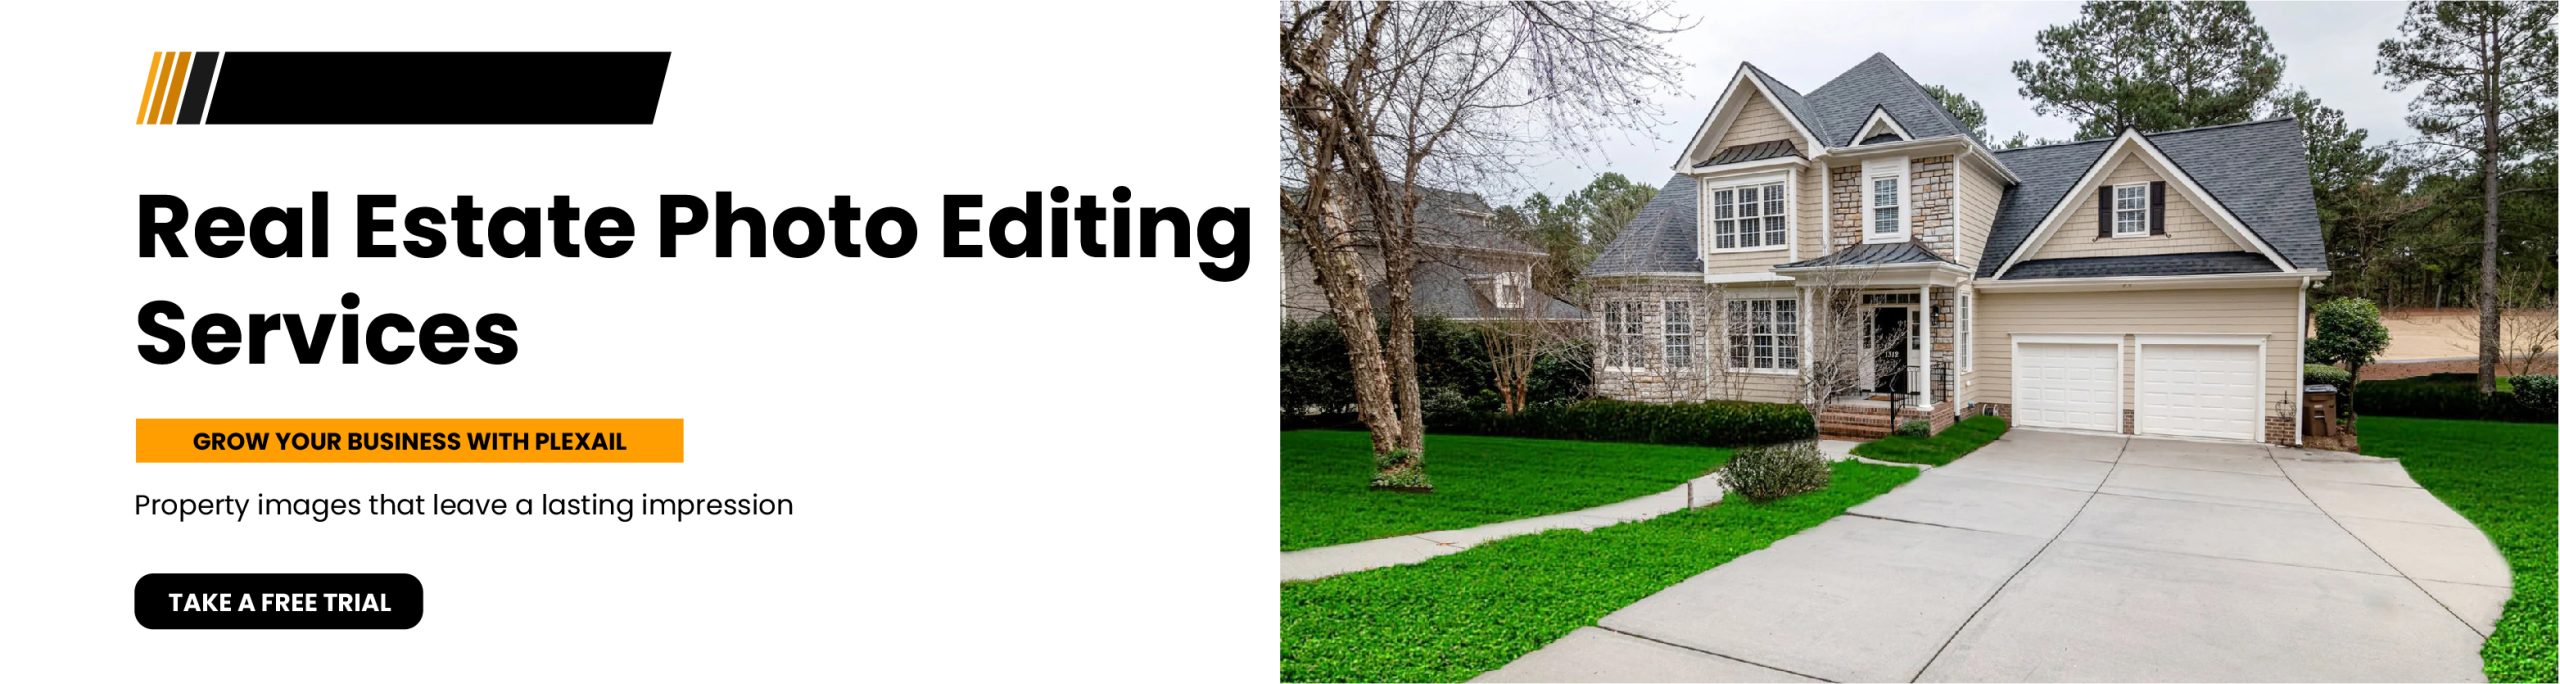 online real estate photo editing